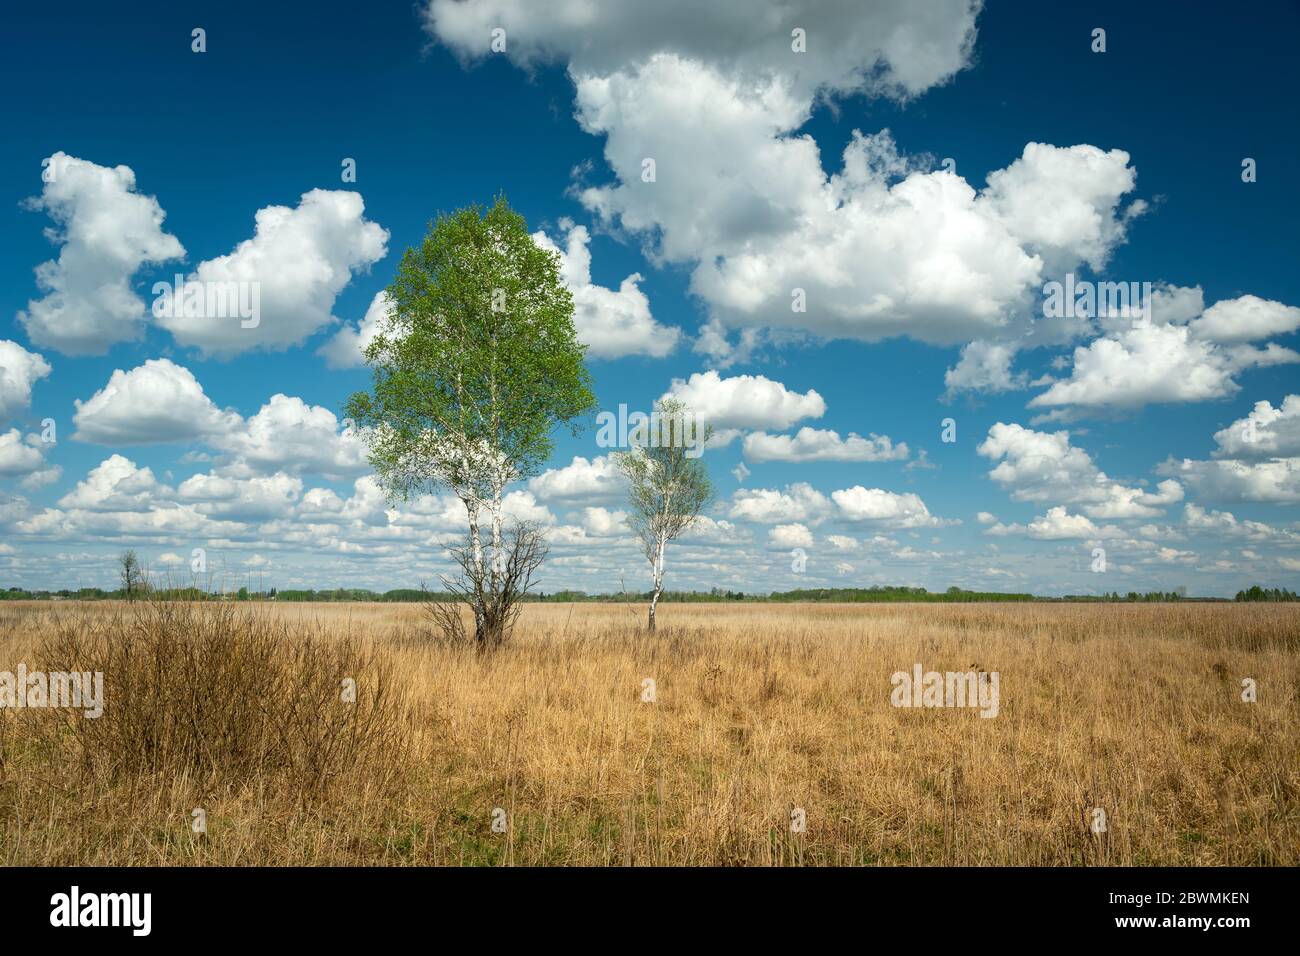 Birch trees with green leaves, dry yellow grass, white clouds on a blue sky Stock Photo